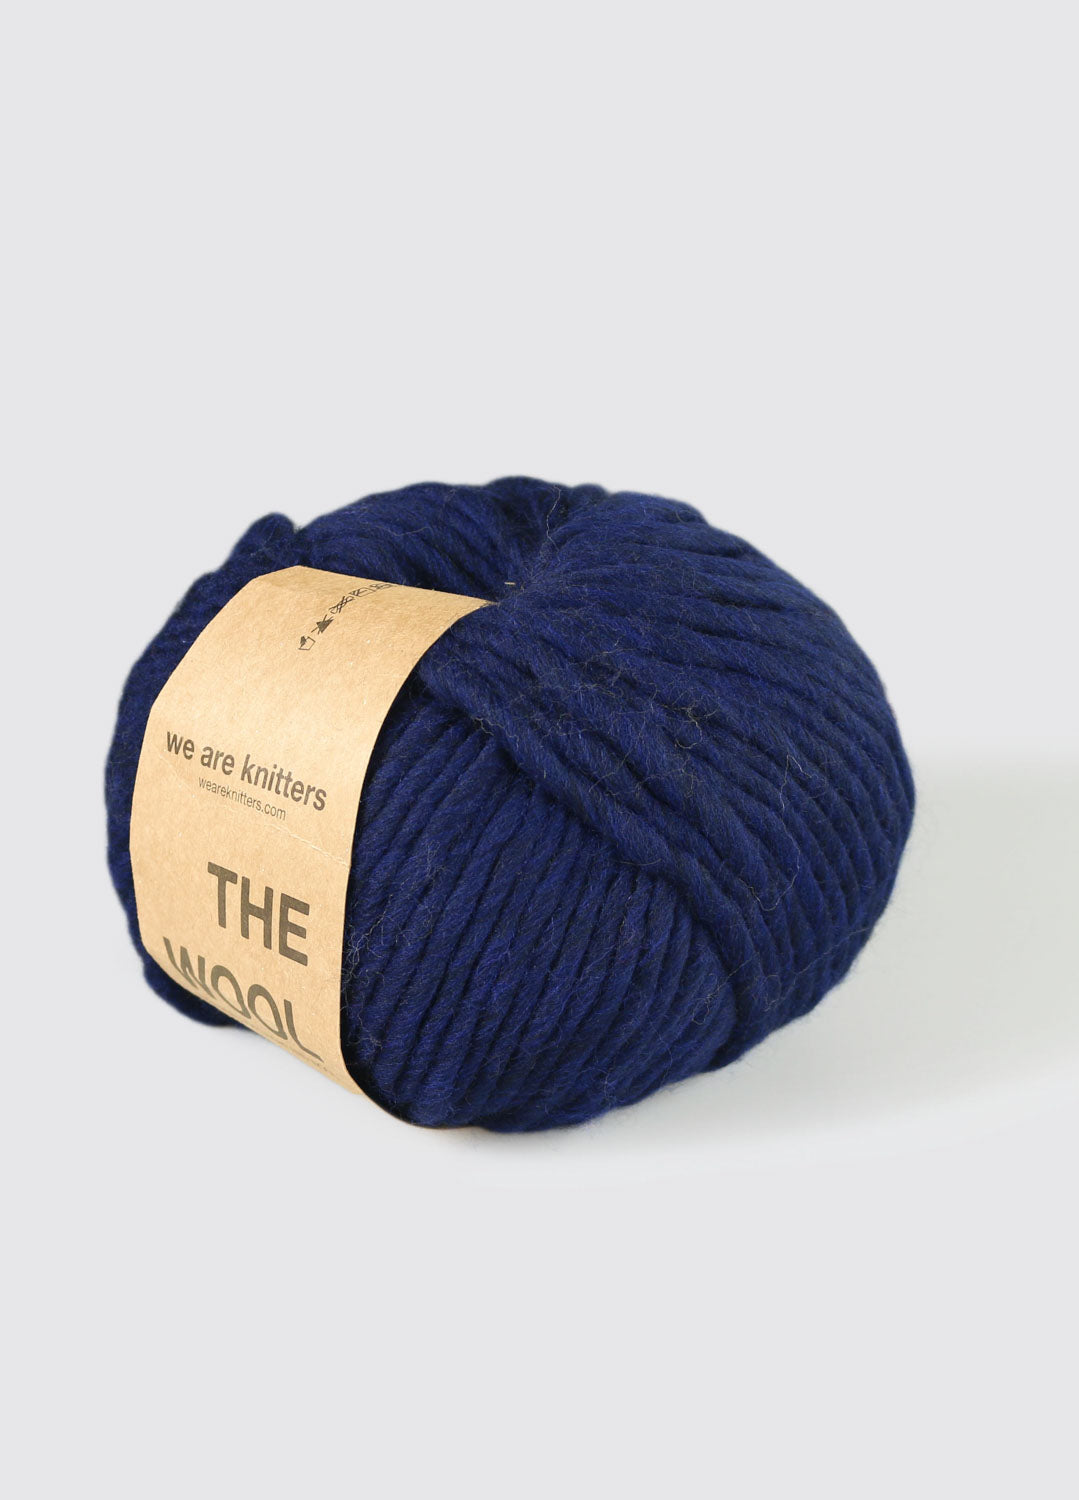 The Wool Navy Blue